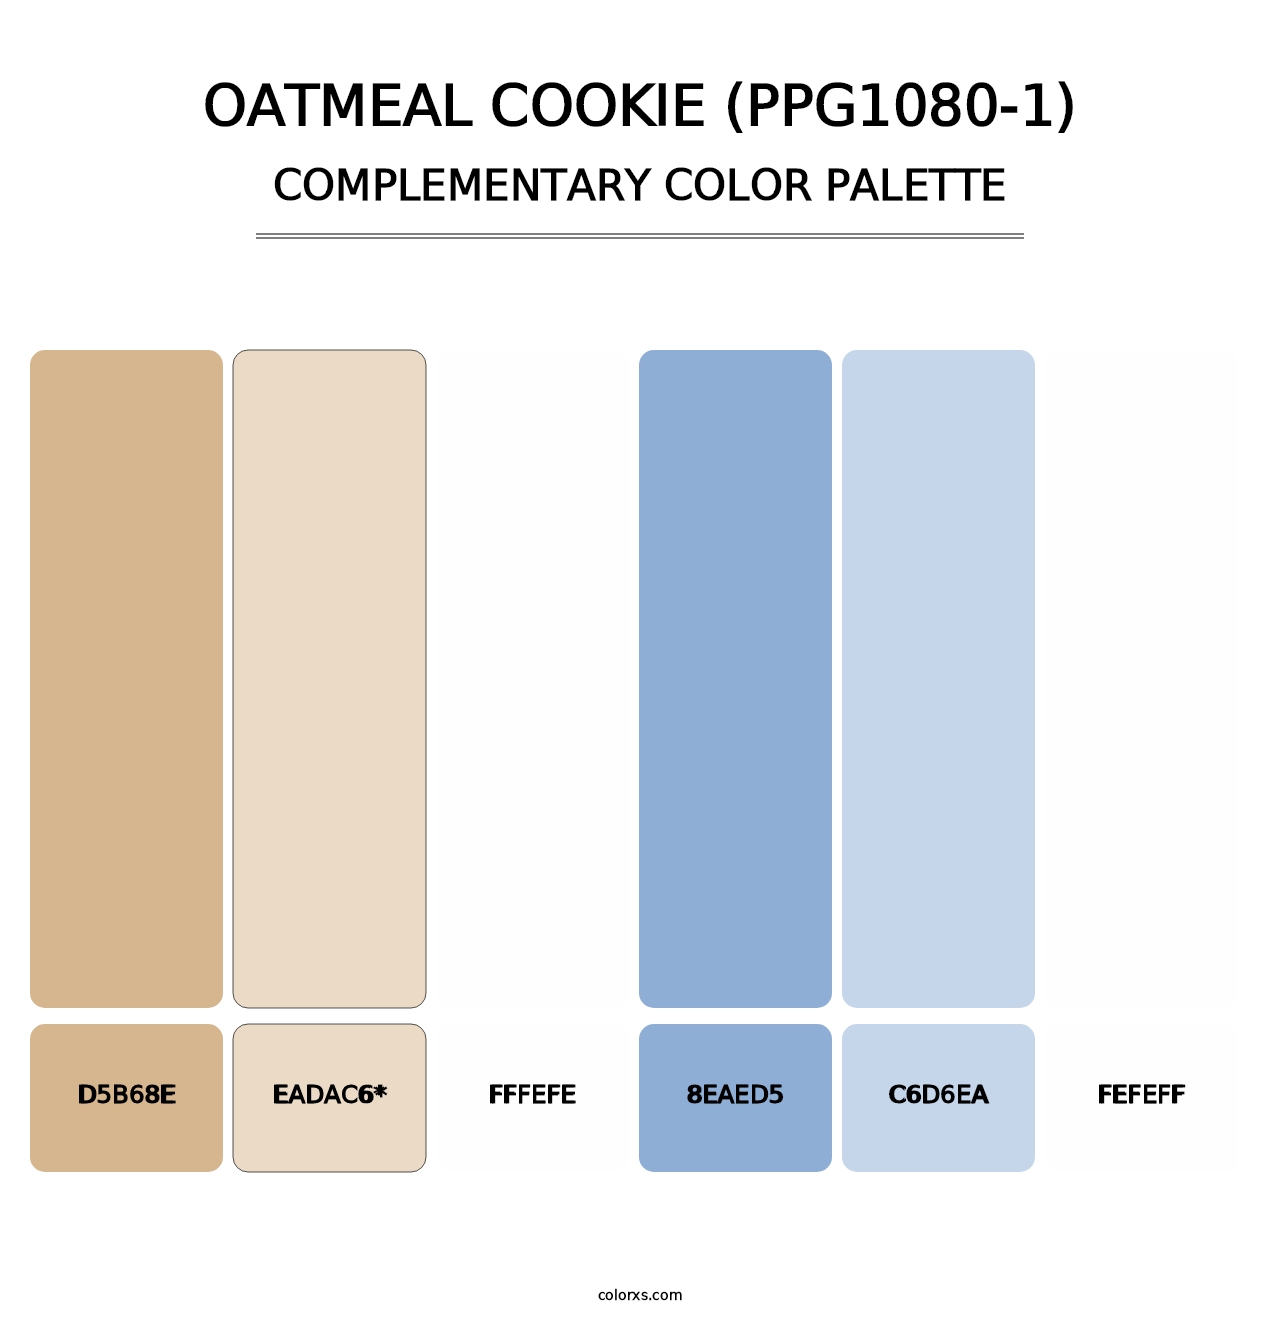 Oatmeal Cookie (PPG1080-1) - Complementary Color Palette